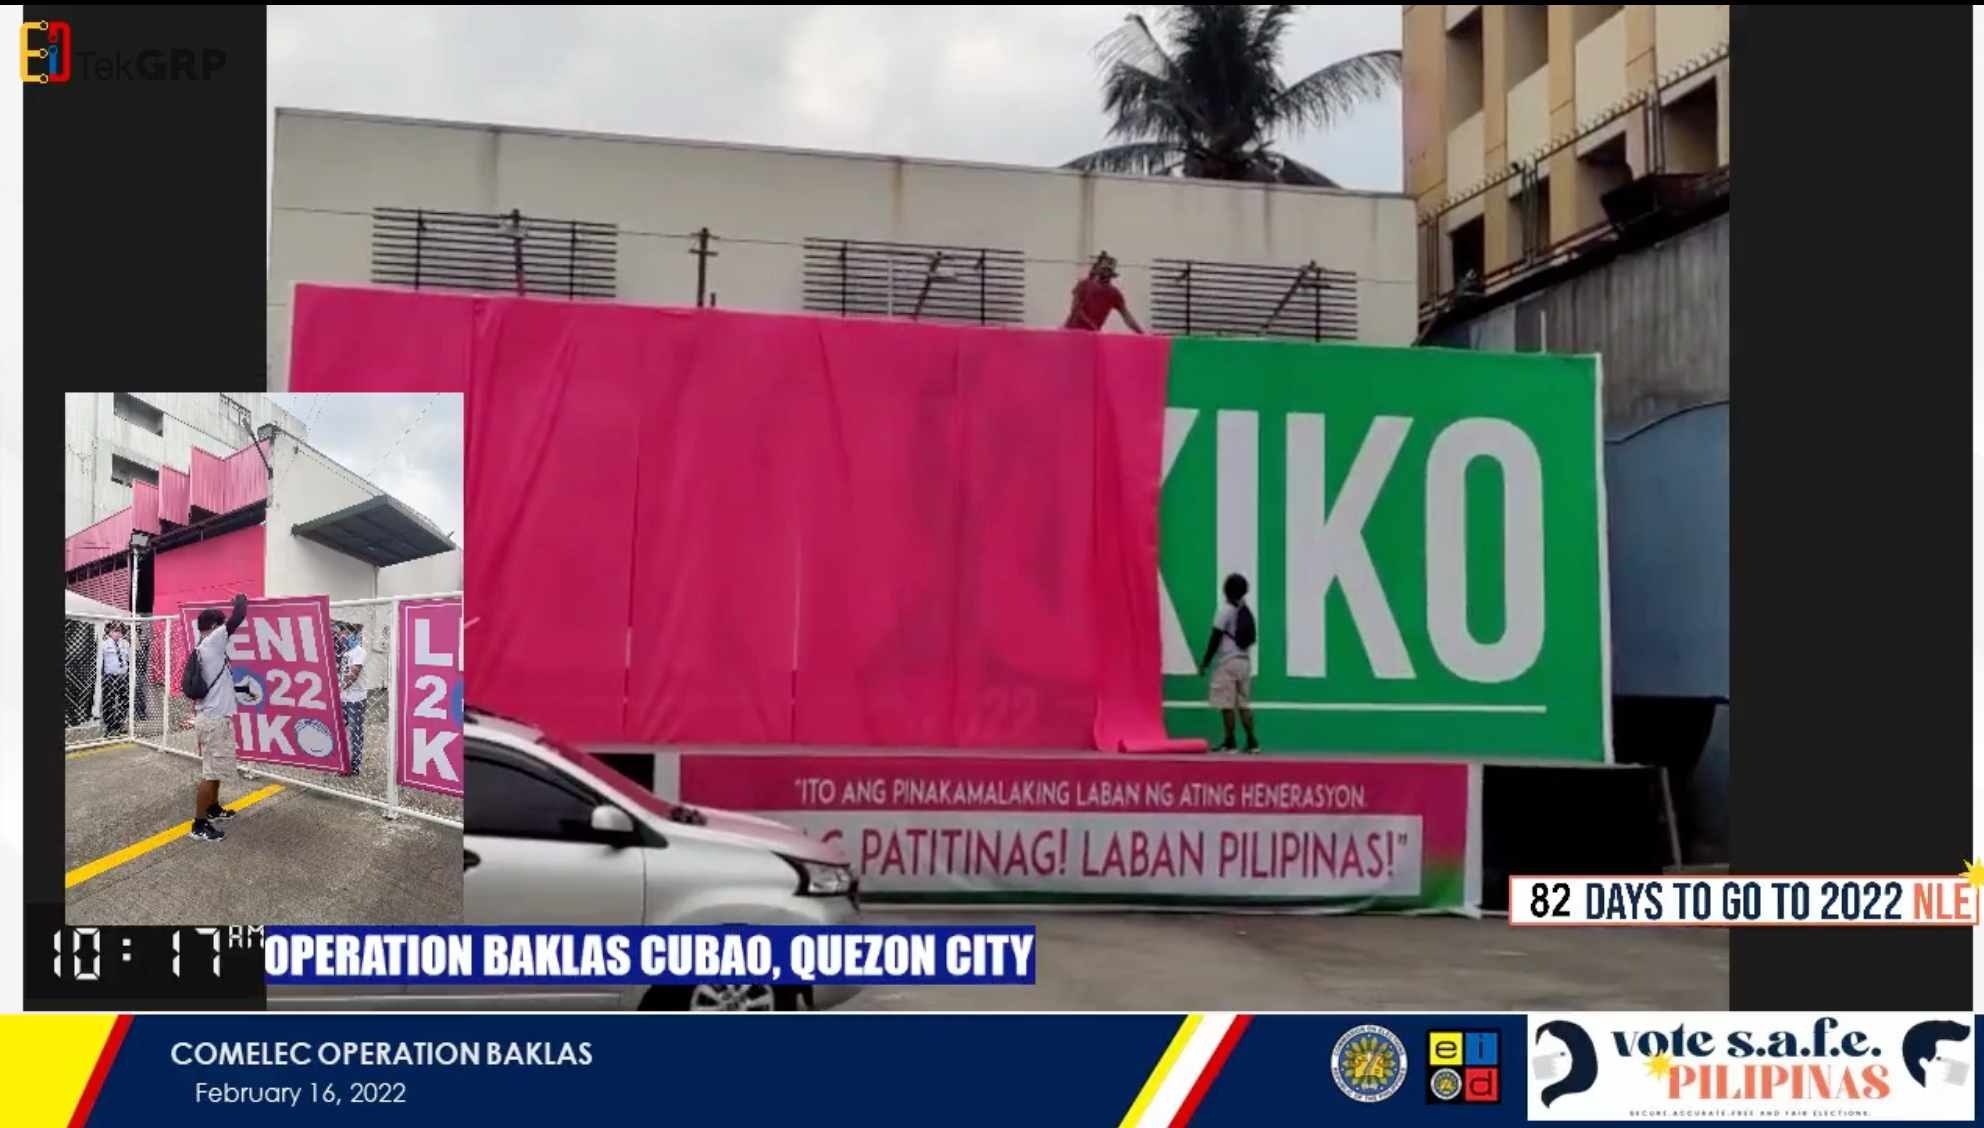 SC says Comelec can’t remove posters on private property, vindicating Robredo supporters